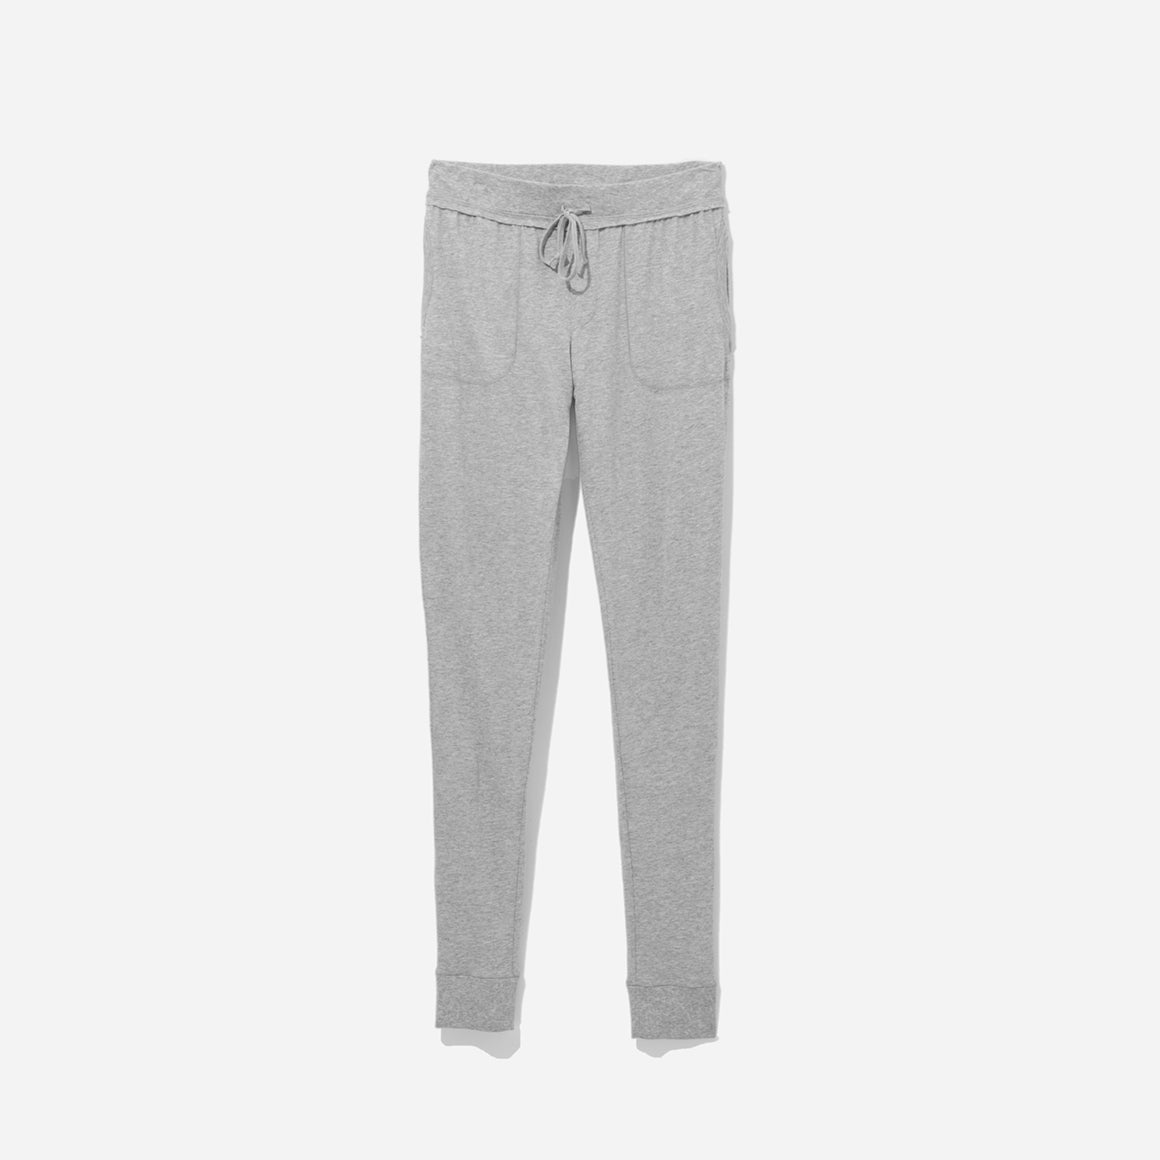 The Skinny Pant features a sleek and form-fitting design that effortlessly flatters your silhouette. Detailed with two convenient hip pockets and an elastic waistband that provides a comfortable and flexible fit. Whether you're lounging at home or running errands, these pants offer both style and comfort.